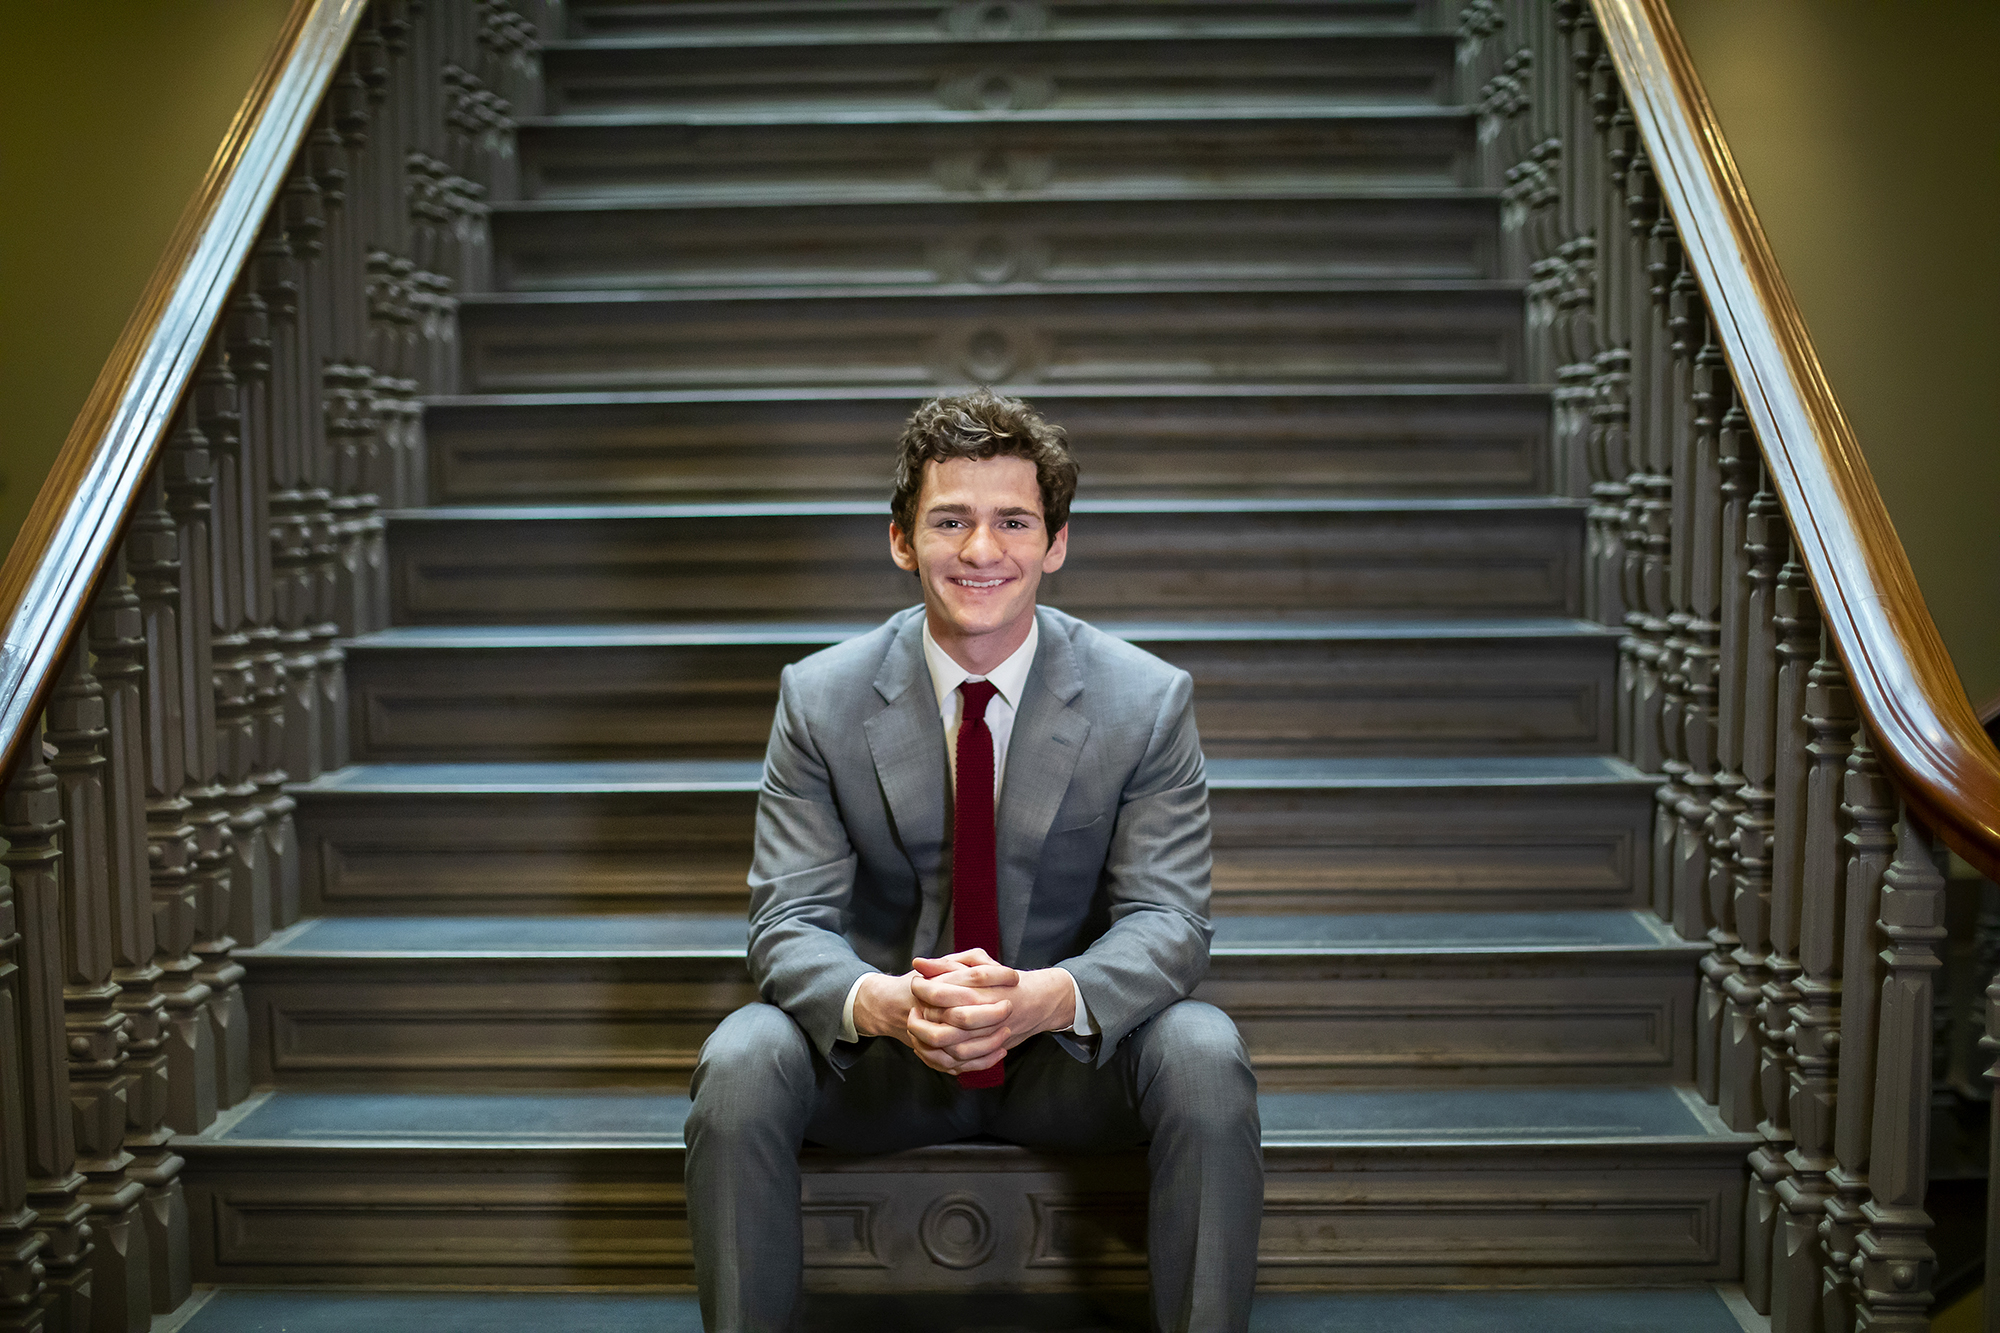 Student sitting on steps wearing a suit and tie. 